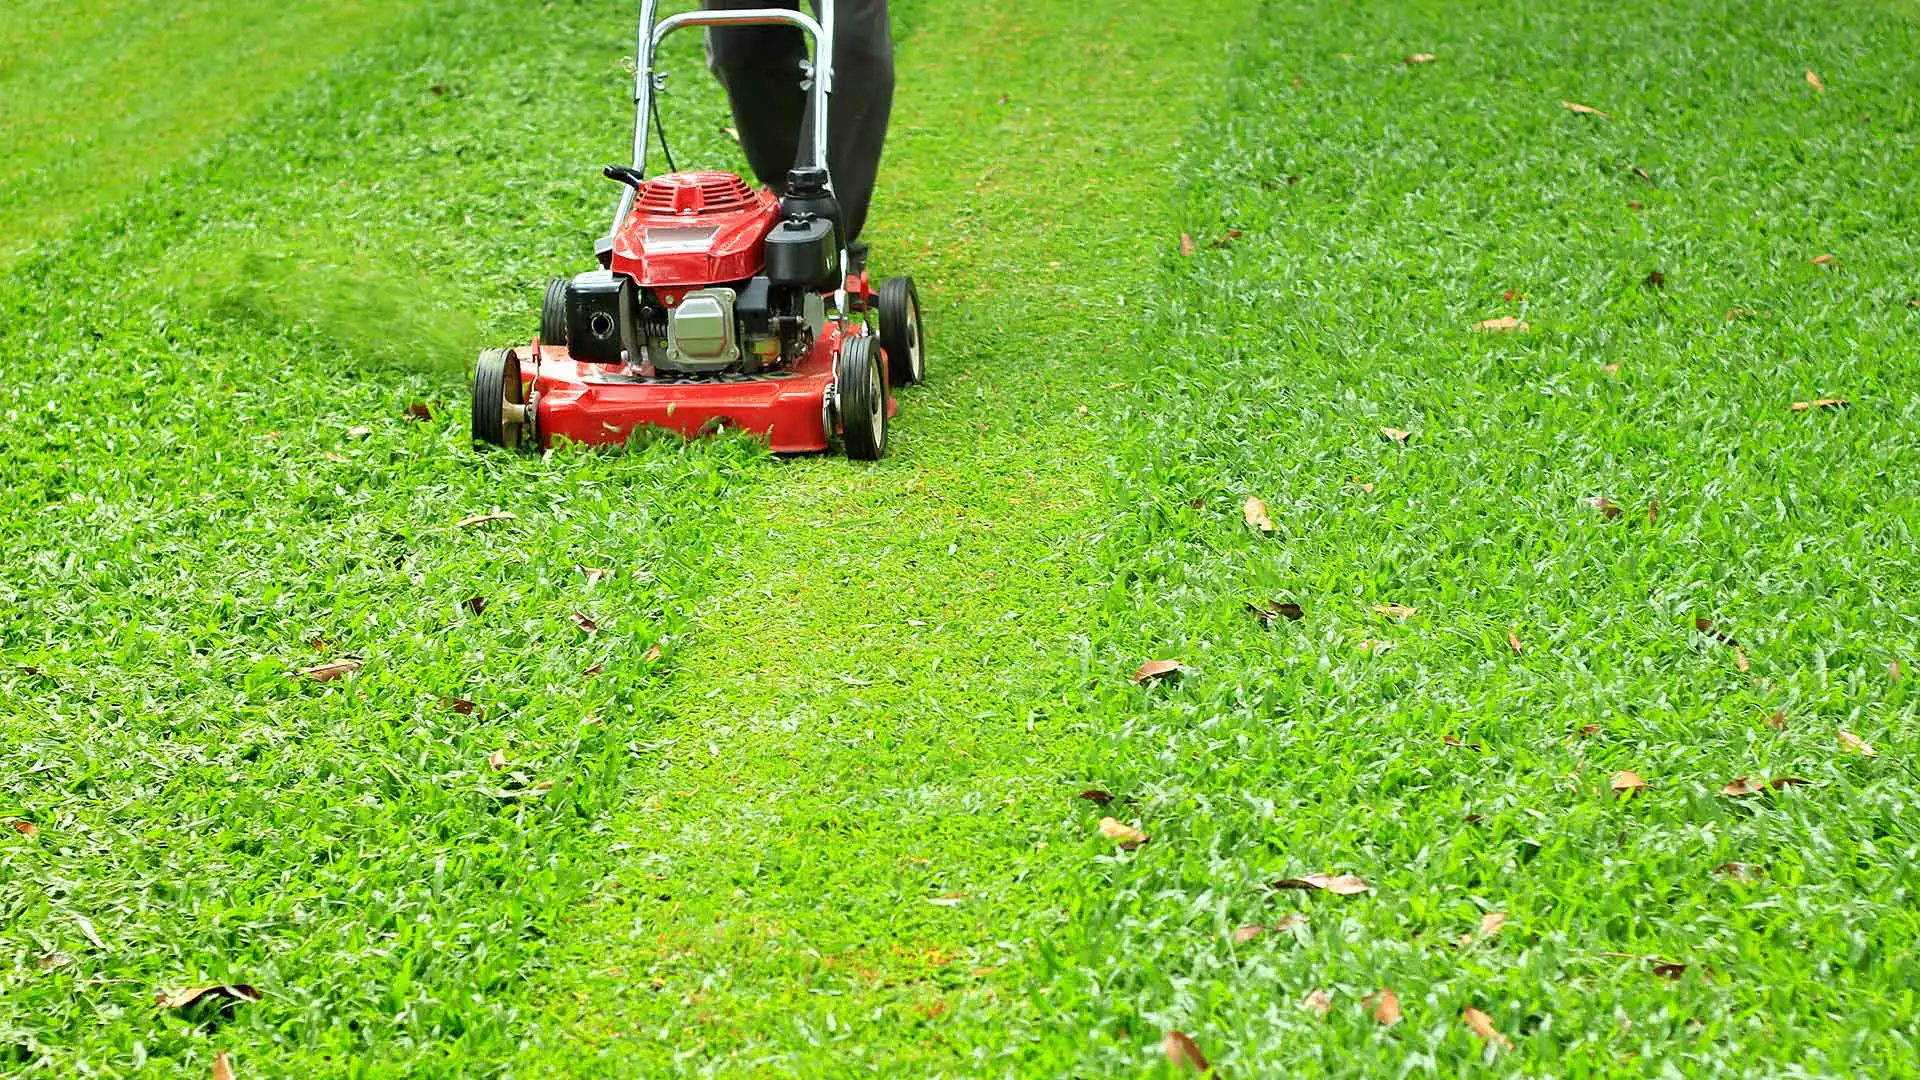 A healthy, lush lawn is being mowed in The Villages, FL.